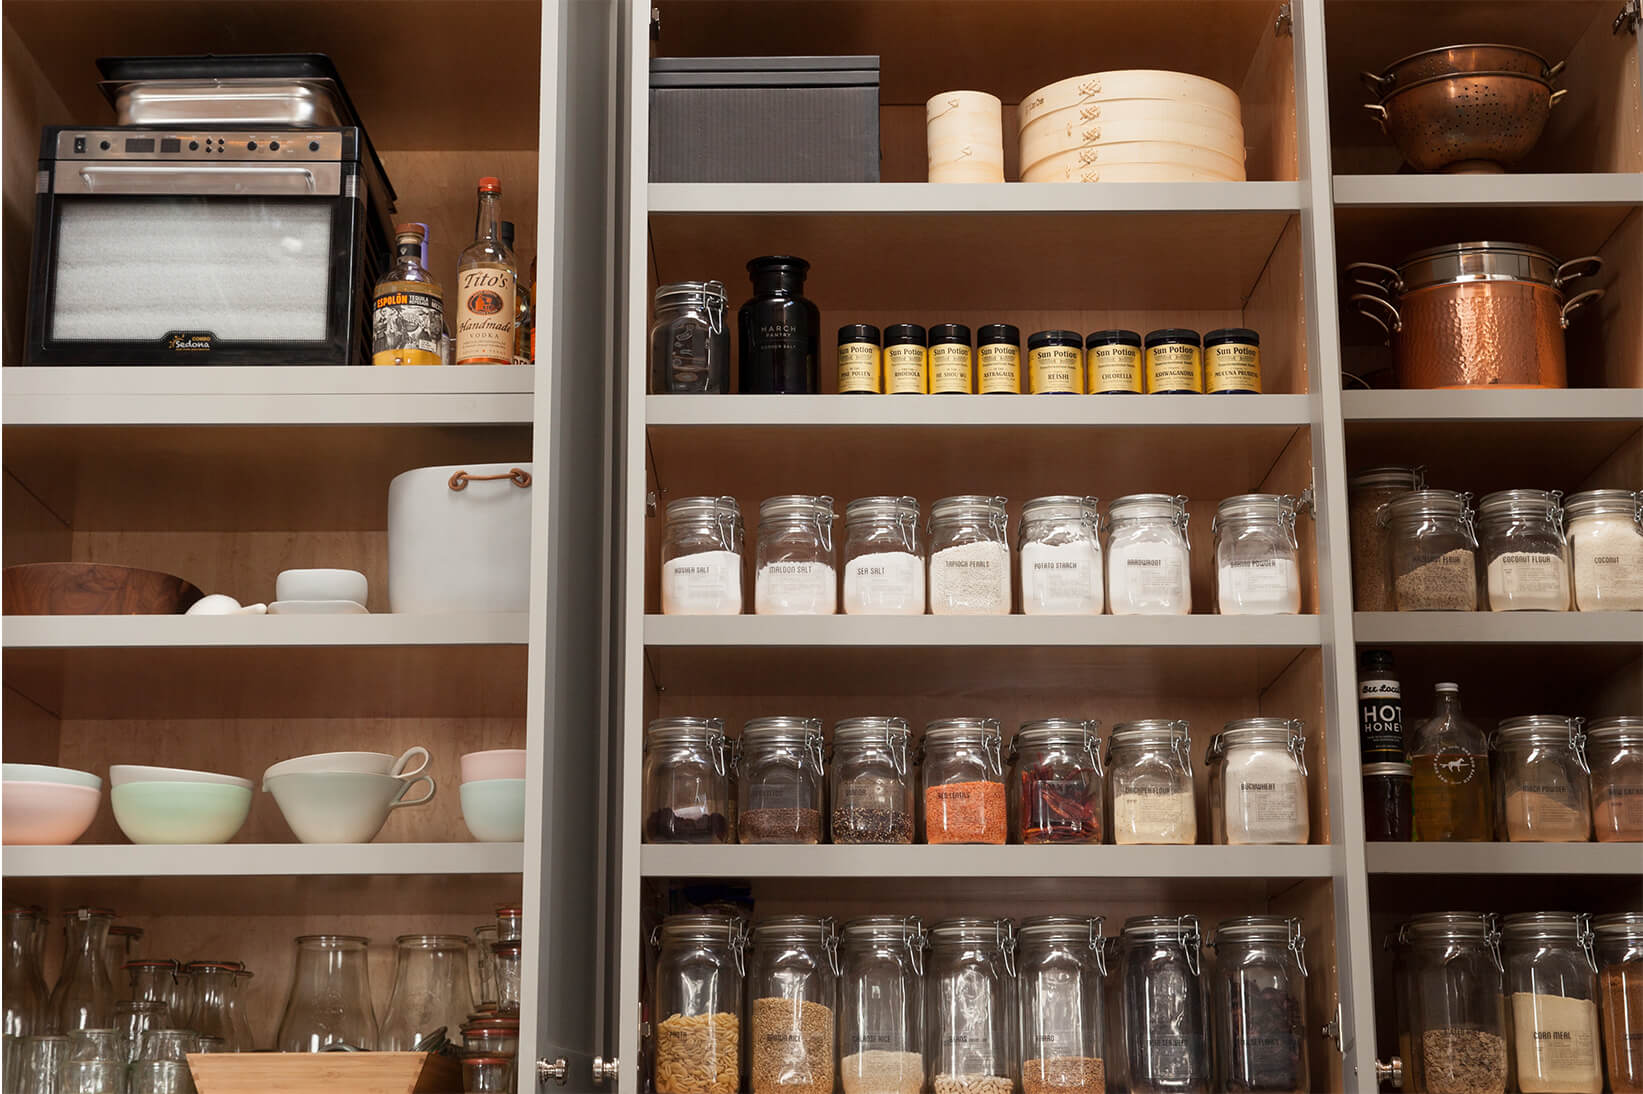 The Pantry Detox: A Brilliant, Clutter-Free Organizational Approach